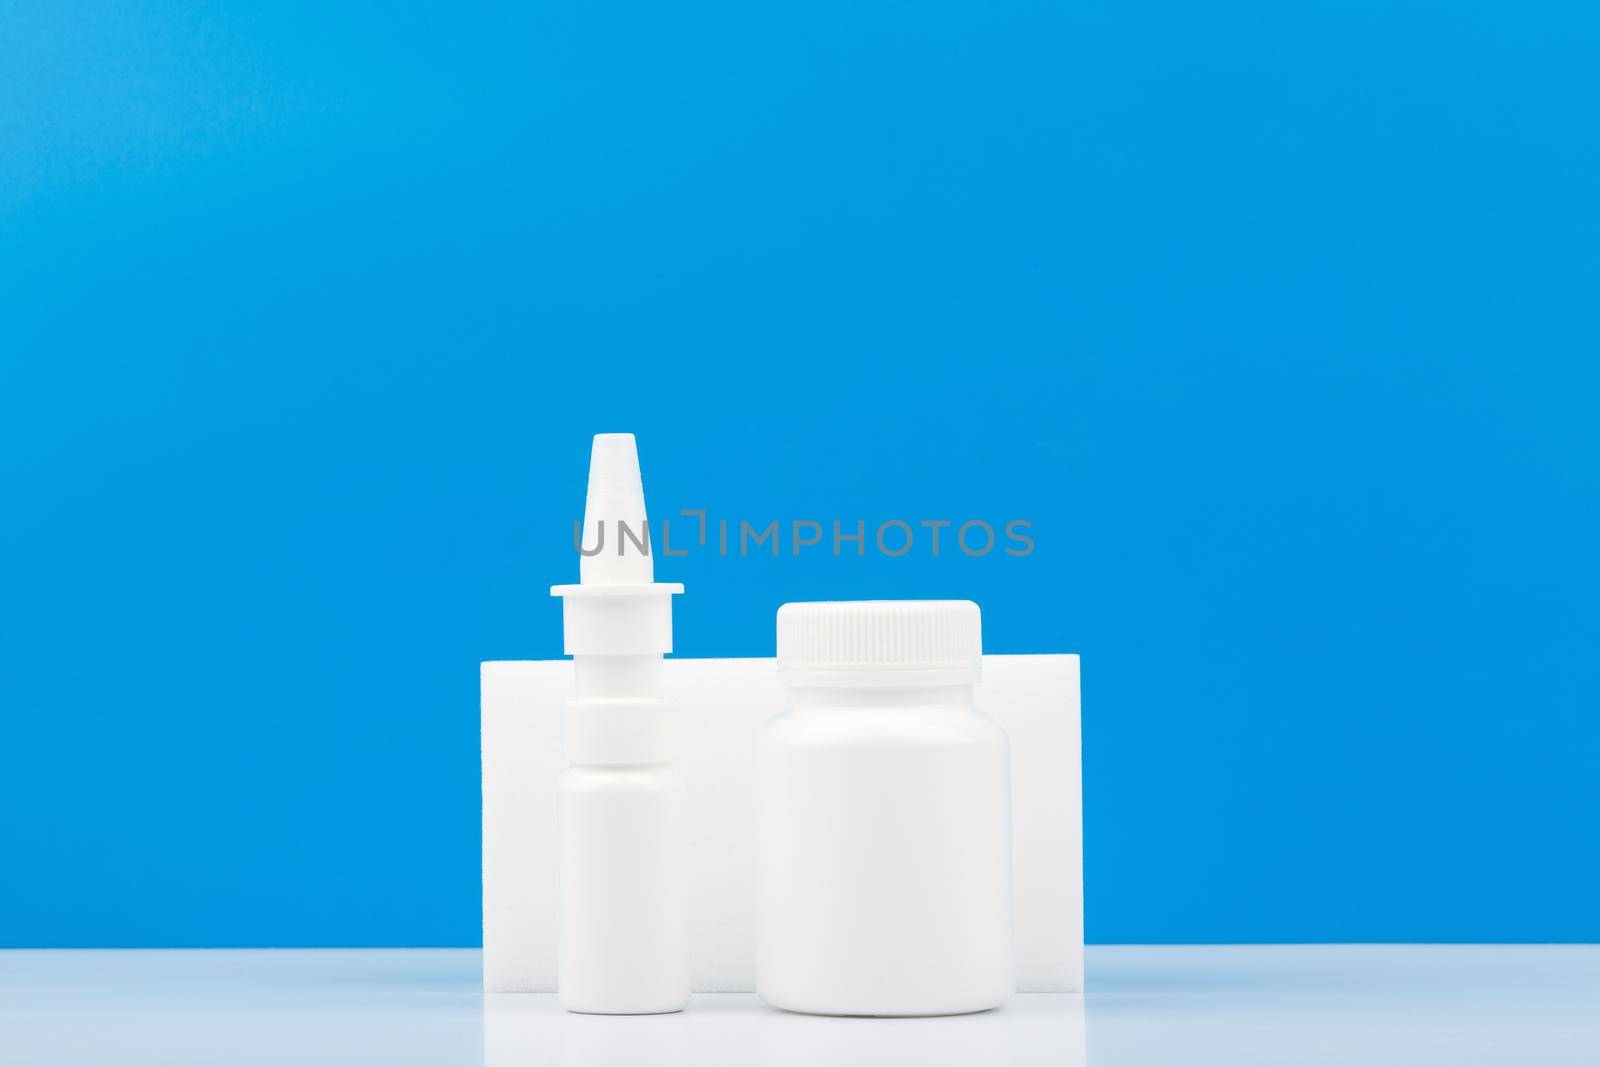 Nose spray and medication bottle on white table against blue background with copy space. Concept of pharmacy  by Senorina_Irina